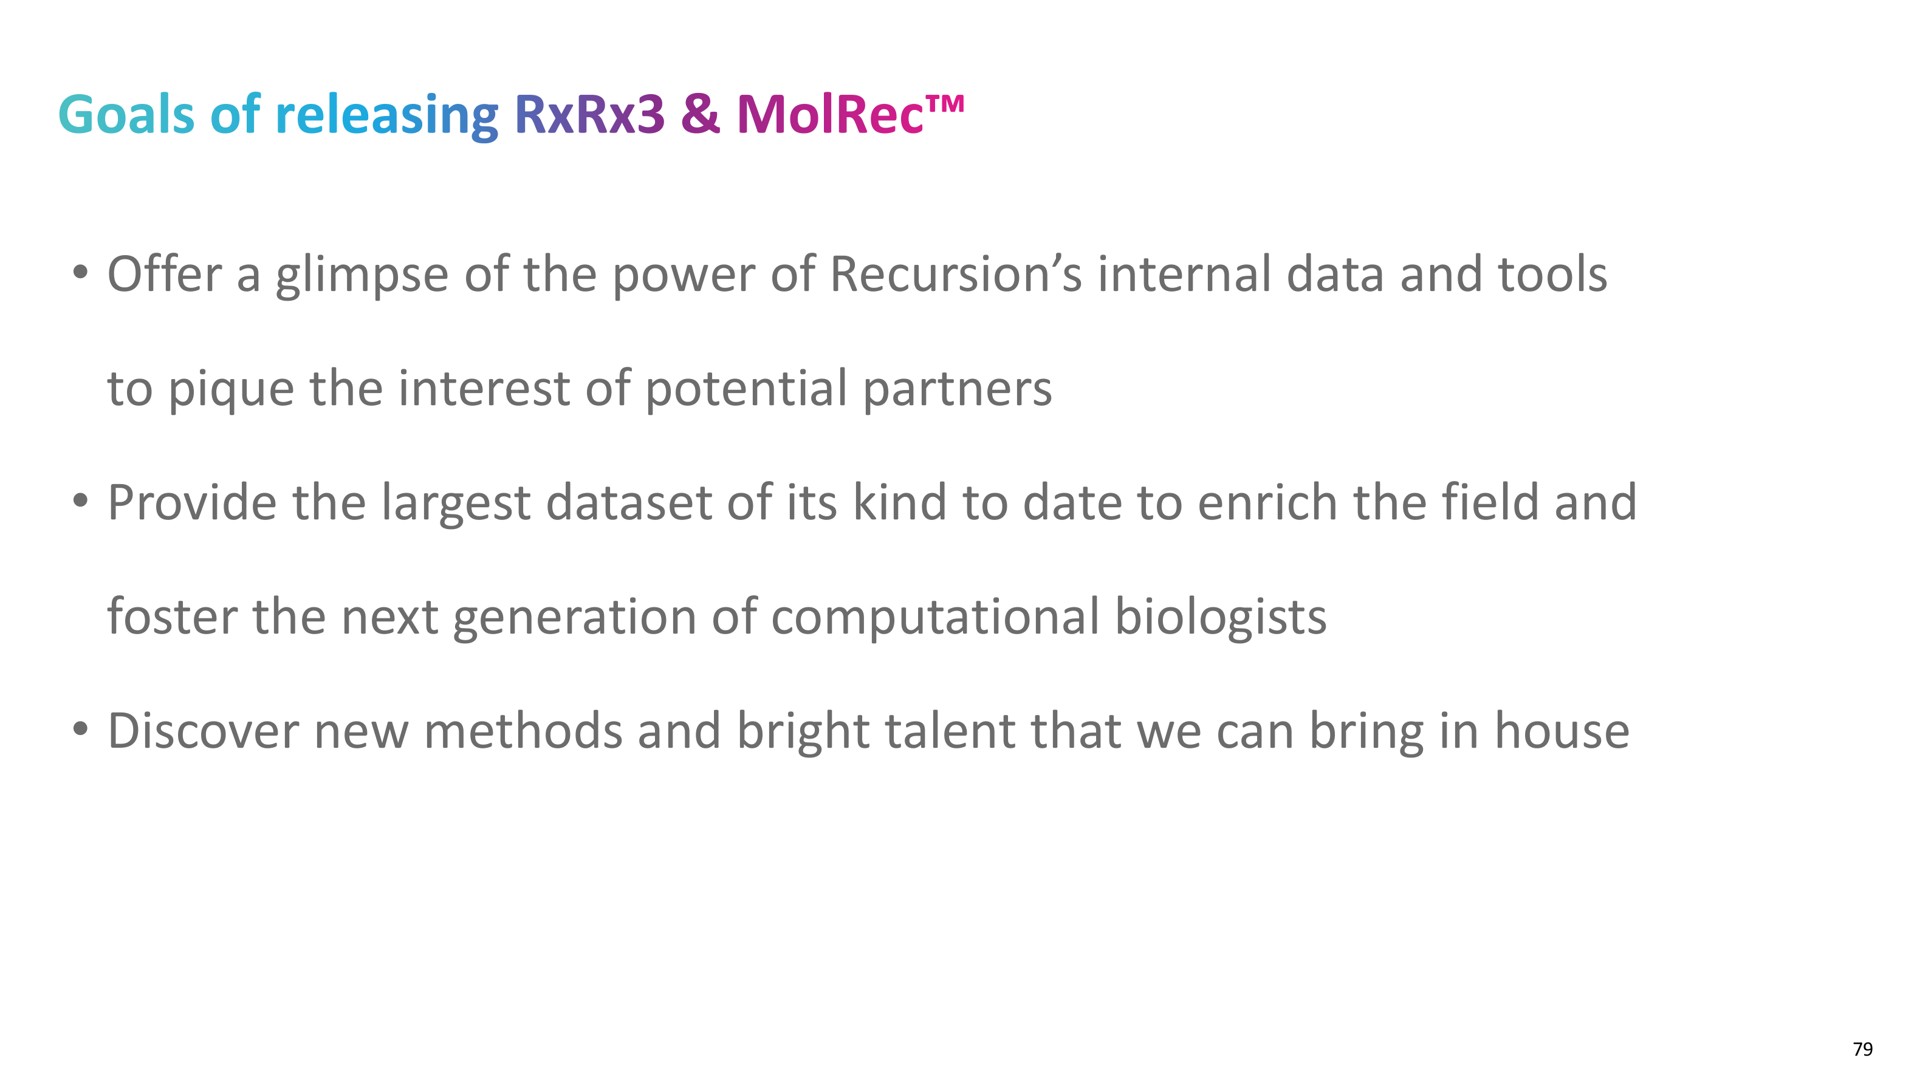 offer a glimpse of the power of recursion internal data and tools to pique the interest of potential partners provide the of its kind to date to enrich the field and foster the next generation of computational biologists discover new methods and bright talent that we can bring in house goals releasing | Recursion Pharmaceuticals